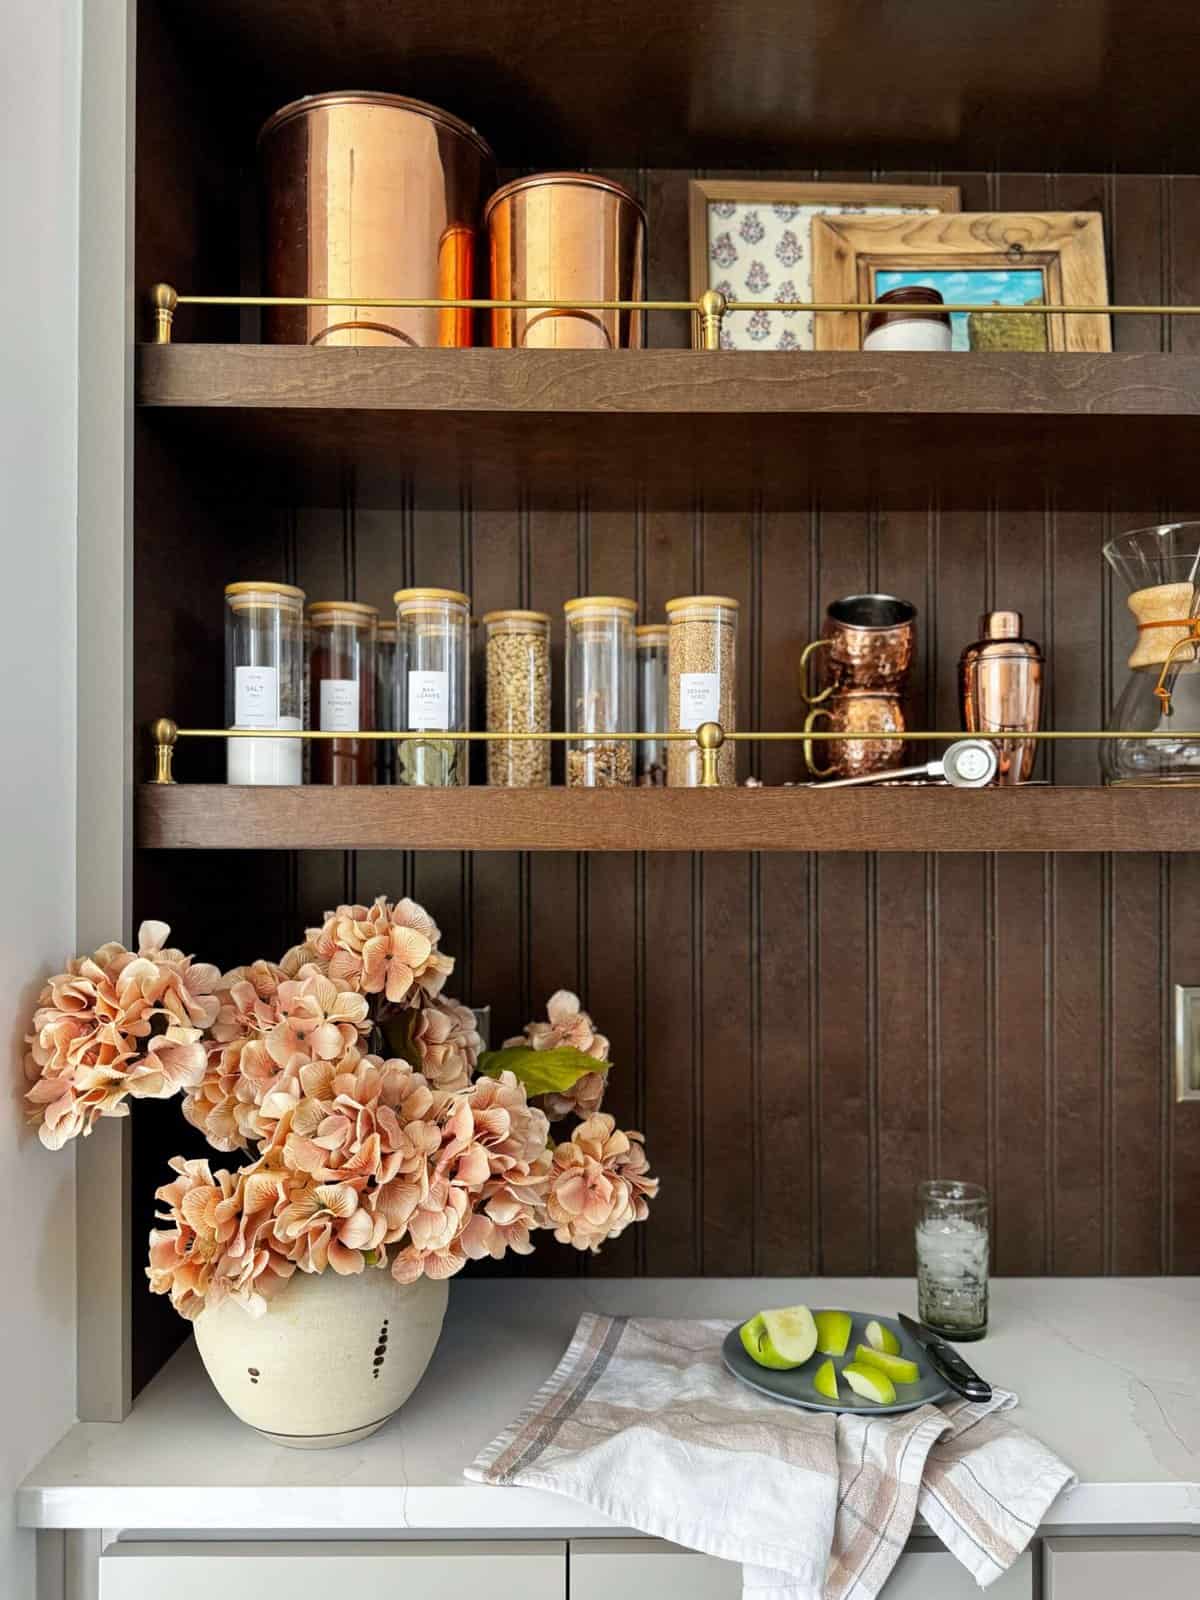 Our Transitional Kitchen Sources: Taupe Cabinets, Mixed Metals & Built-in Hutch